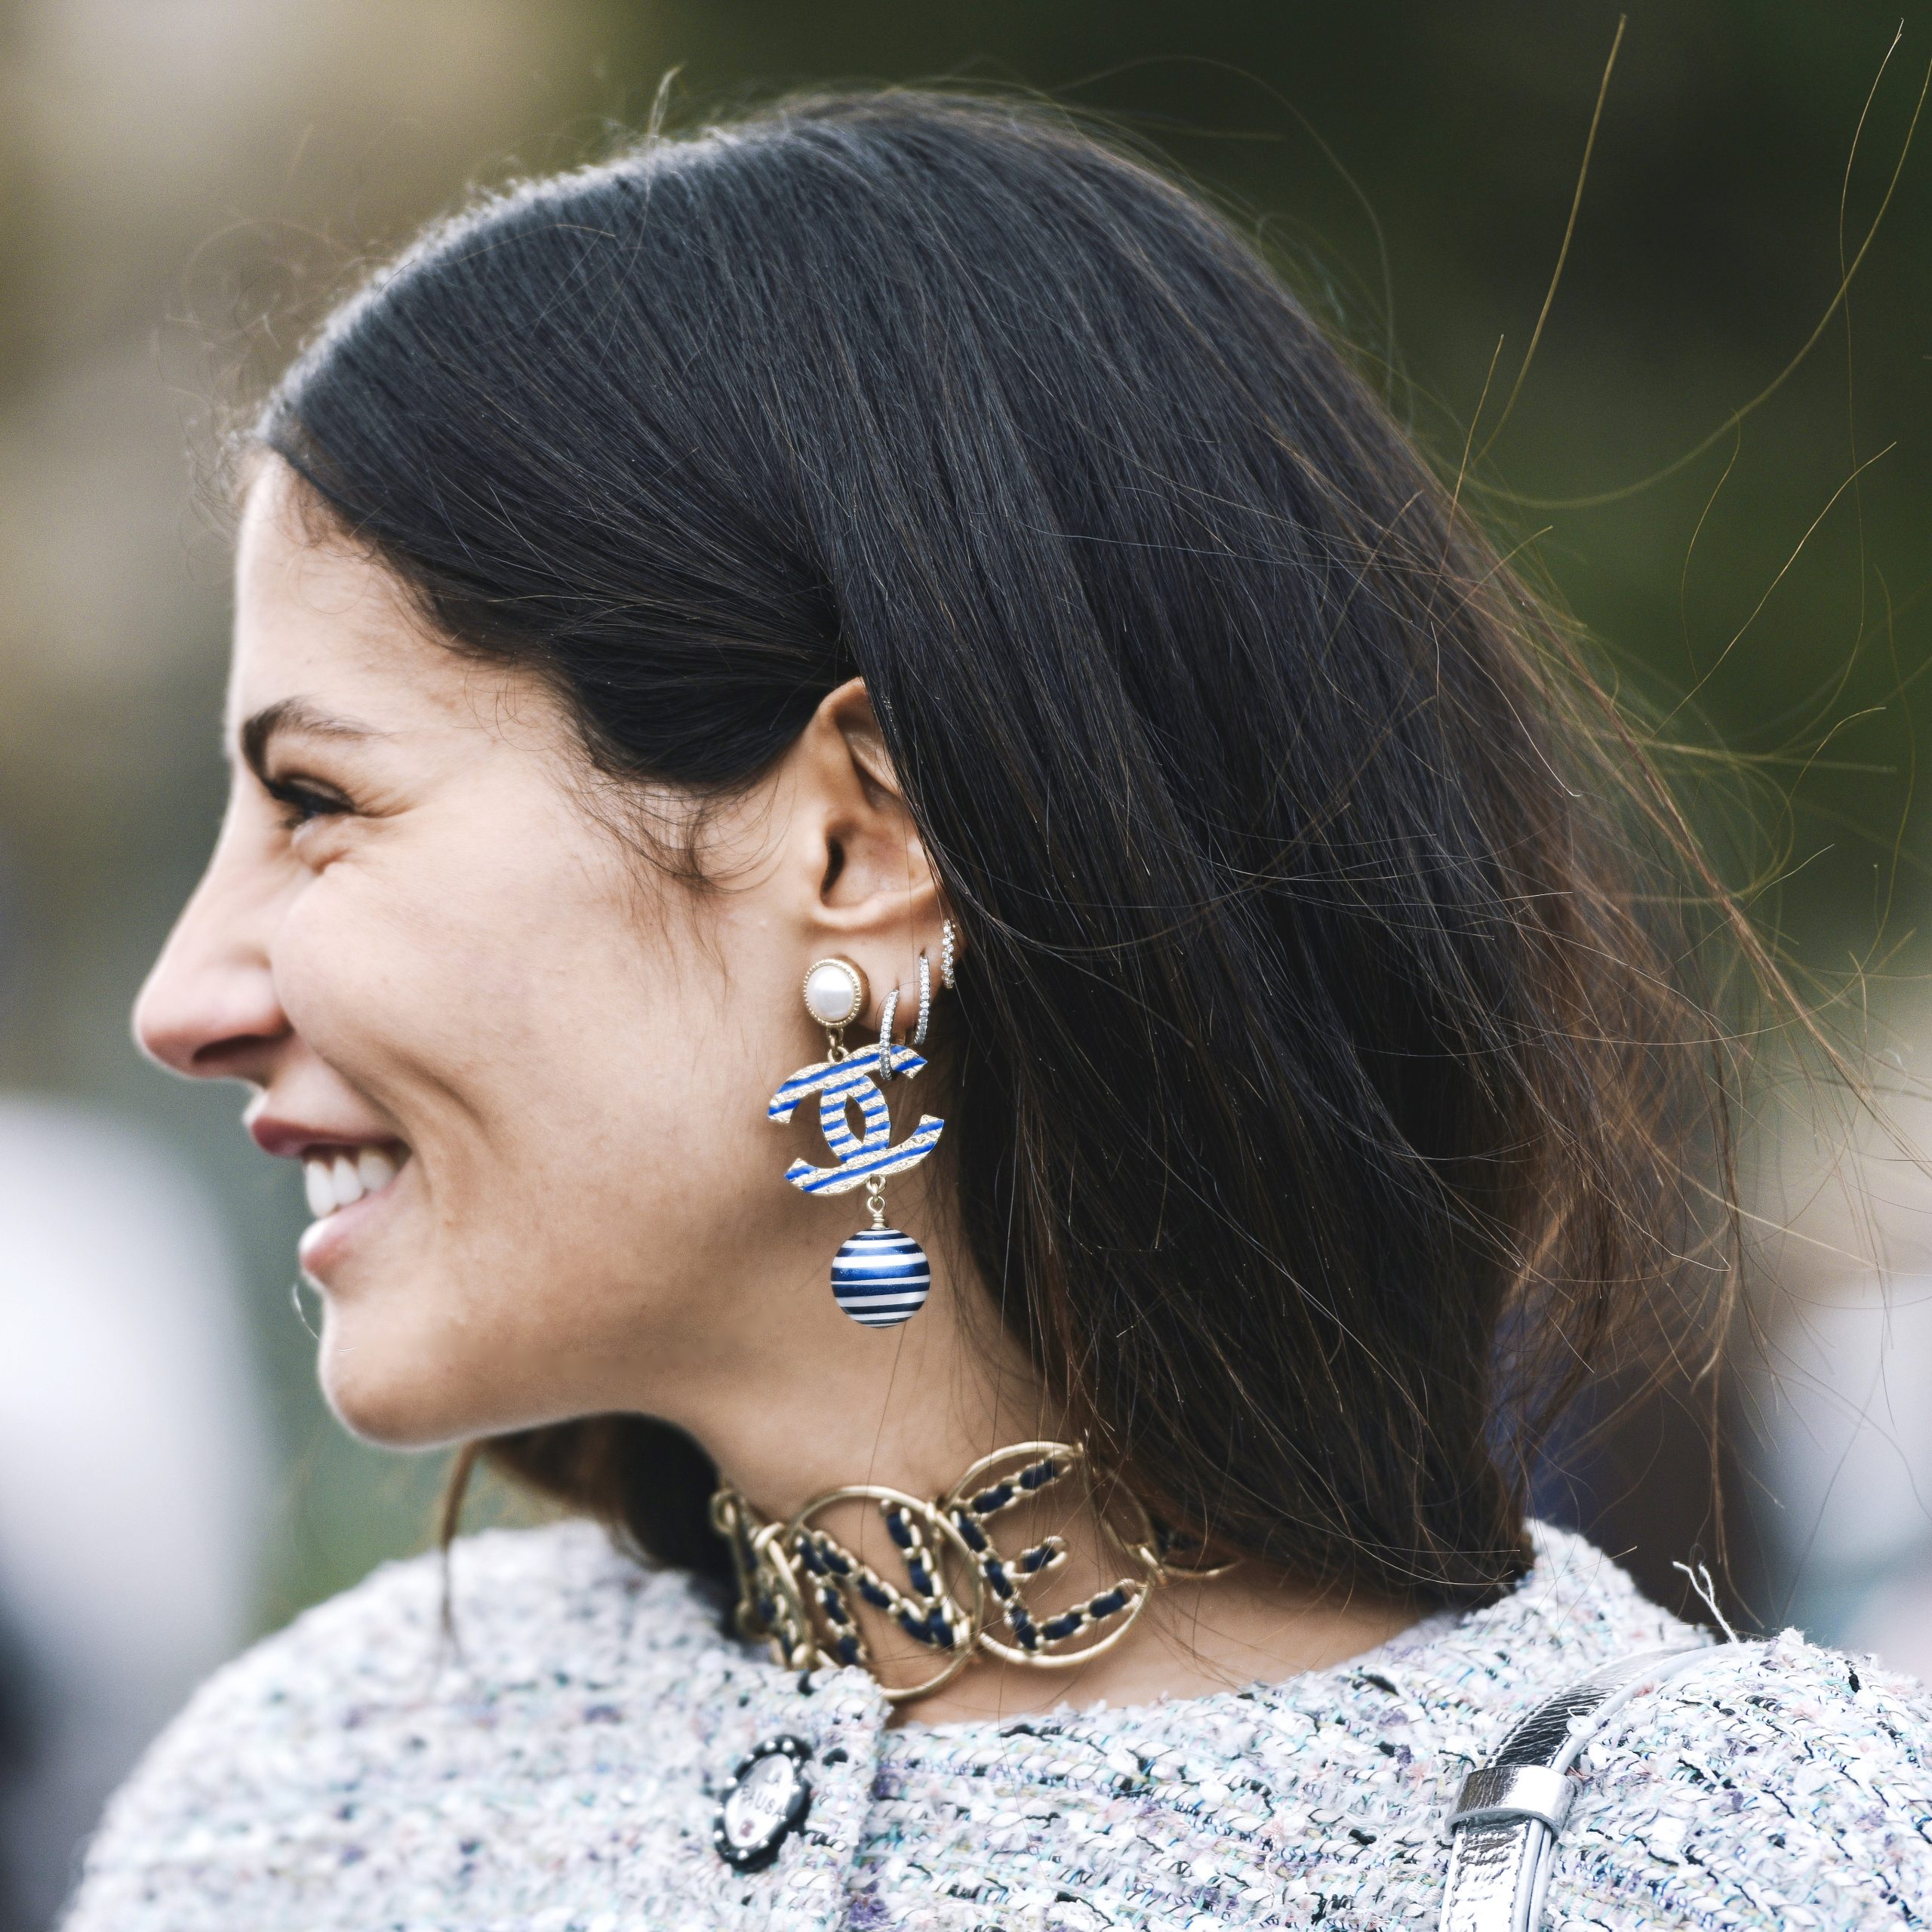 fashionista wearing a earring and necklace from Chanel